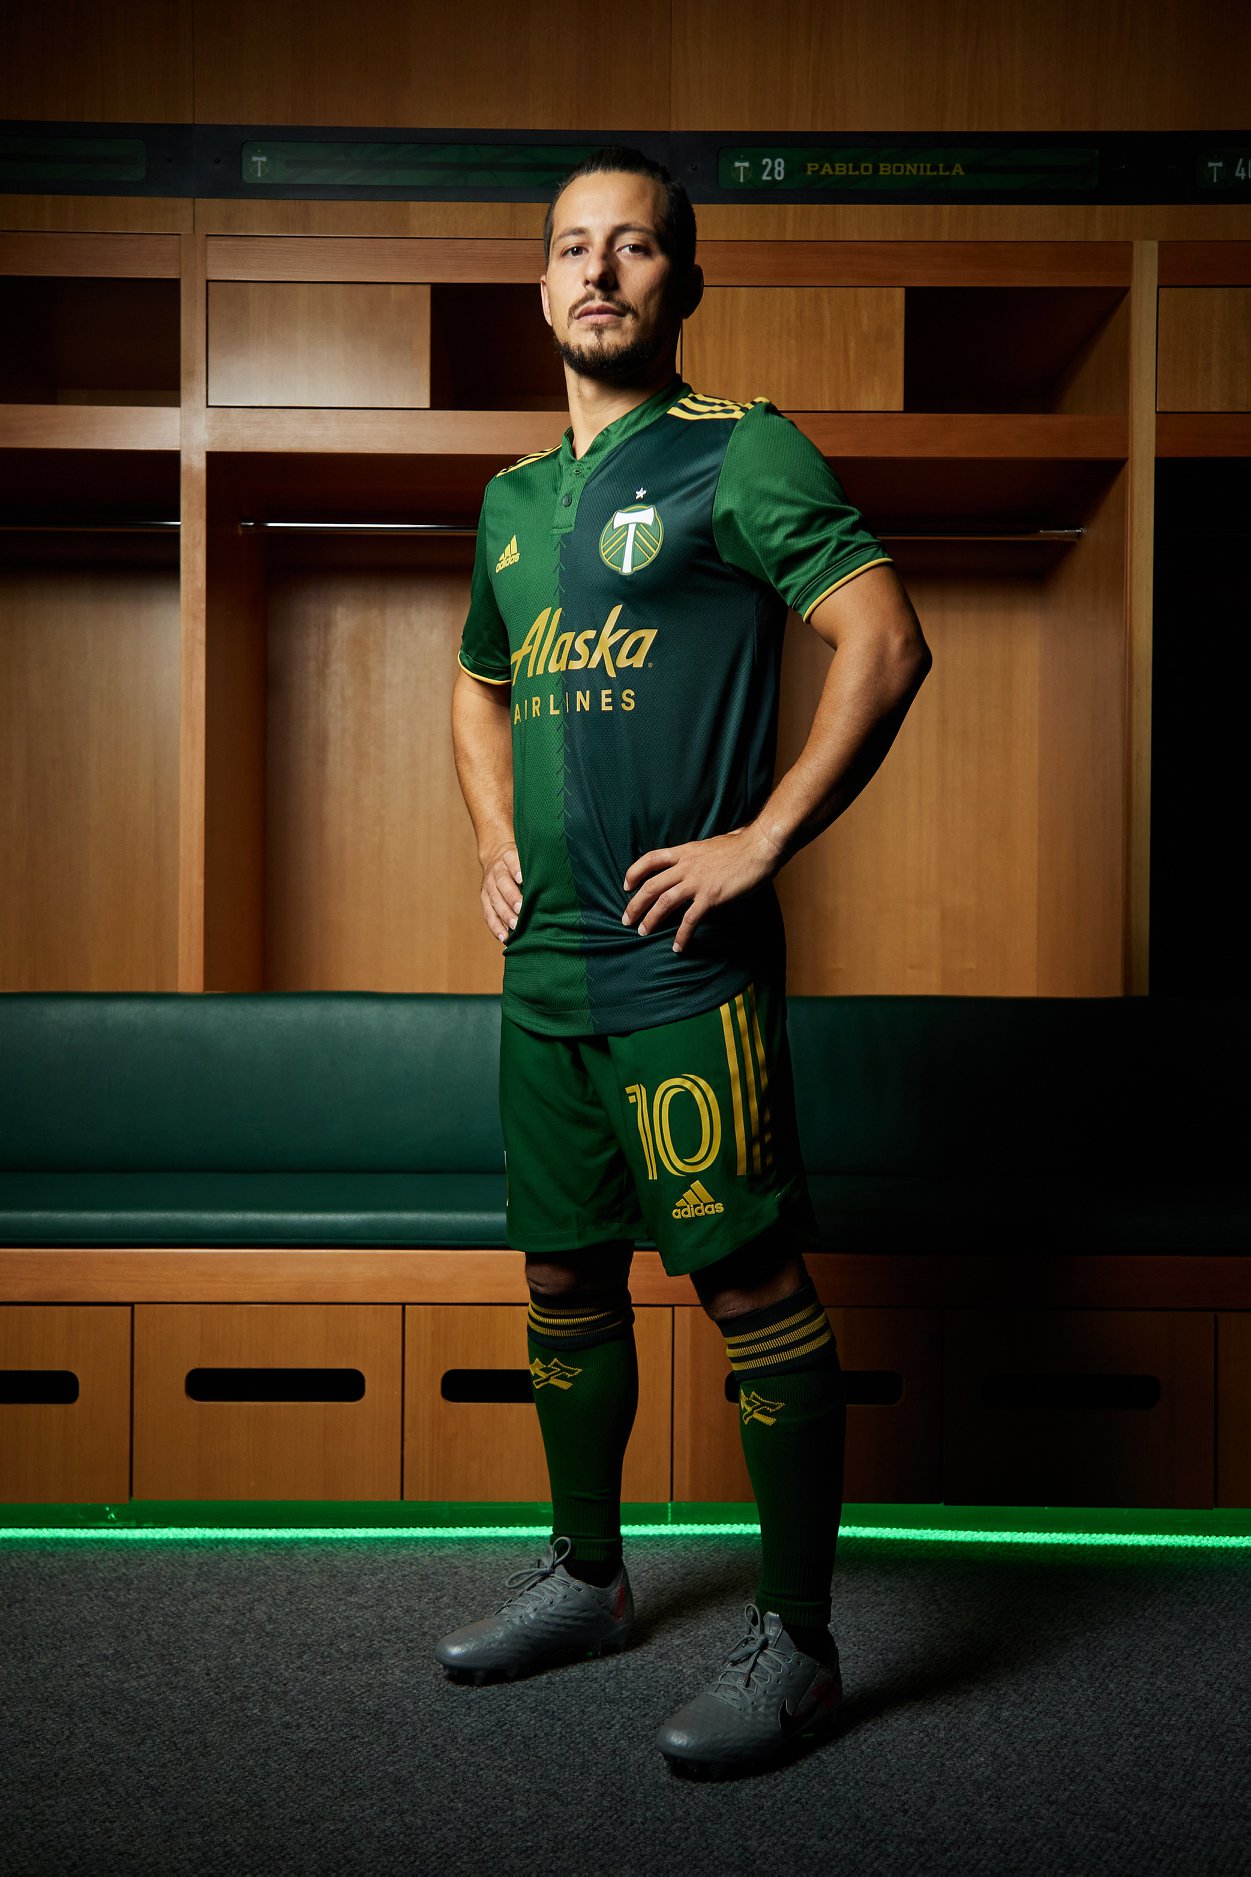 Monarch triangle stainless Portland Timbers 2021 Adidas Home Kit - Football Shirt Culture - Latest  Football Kit News and More